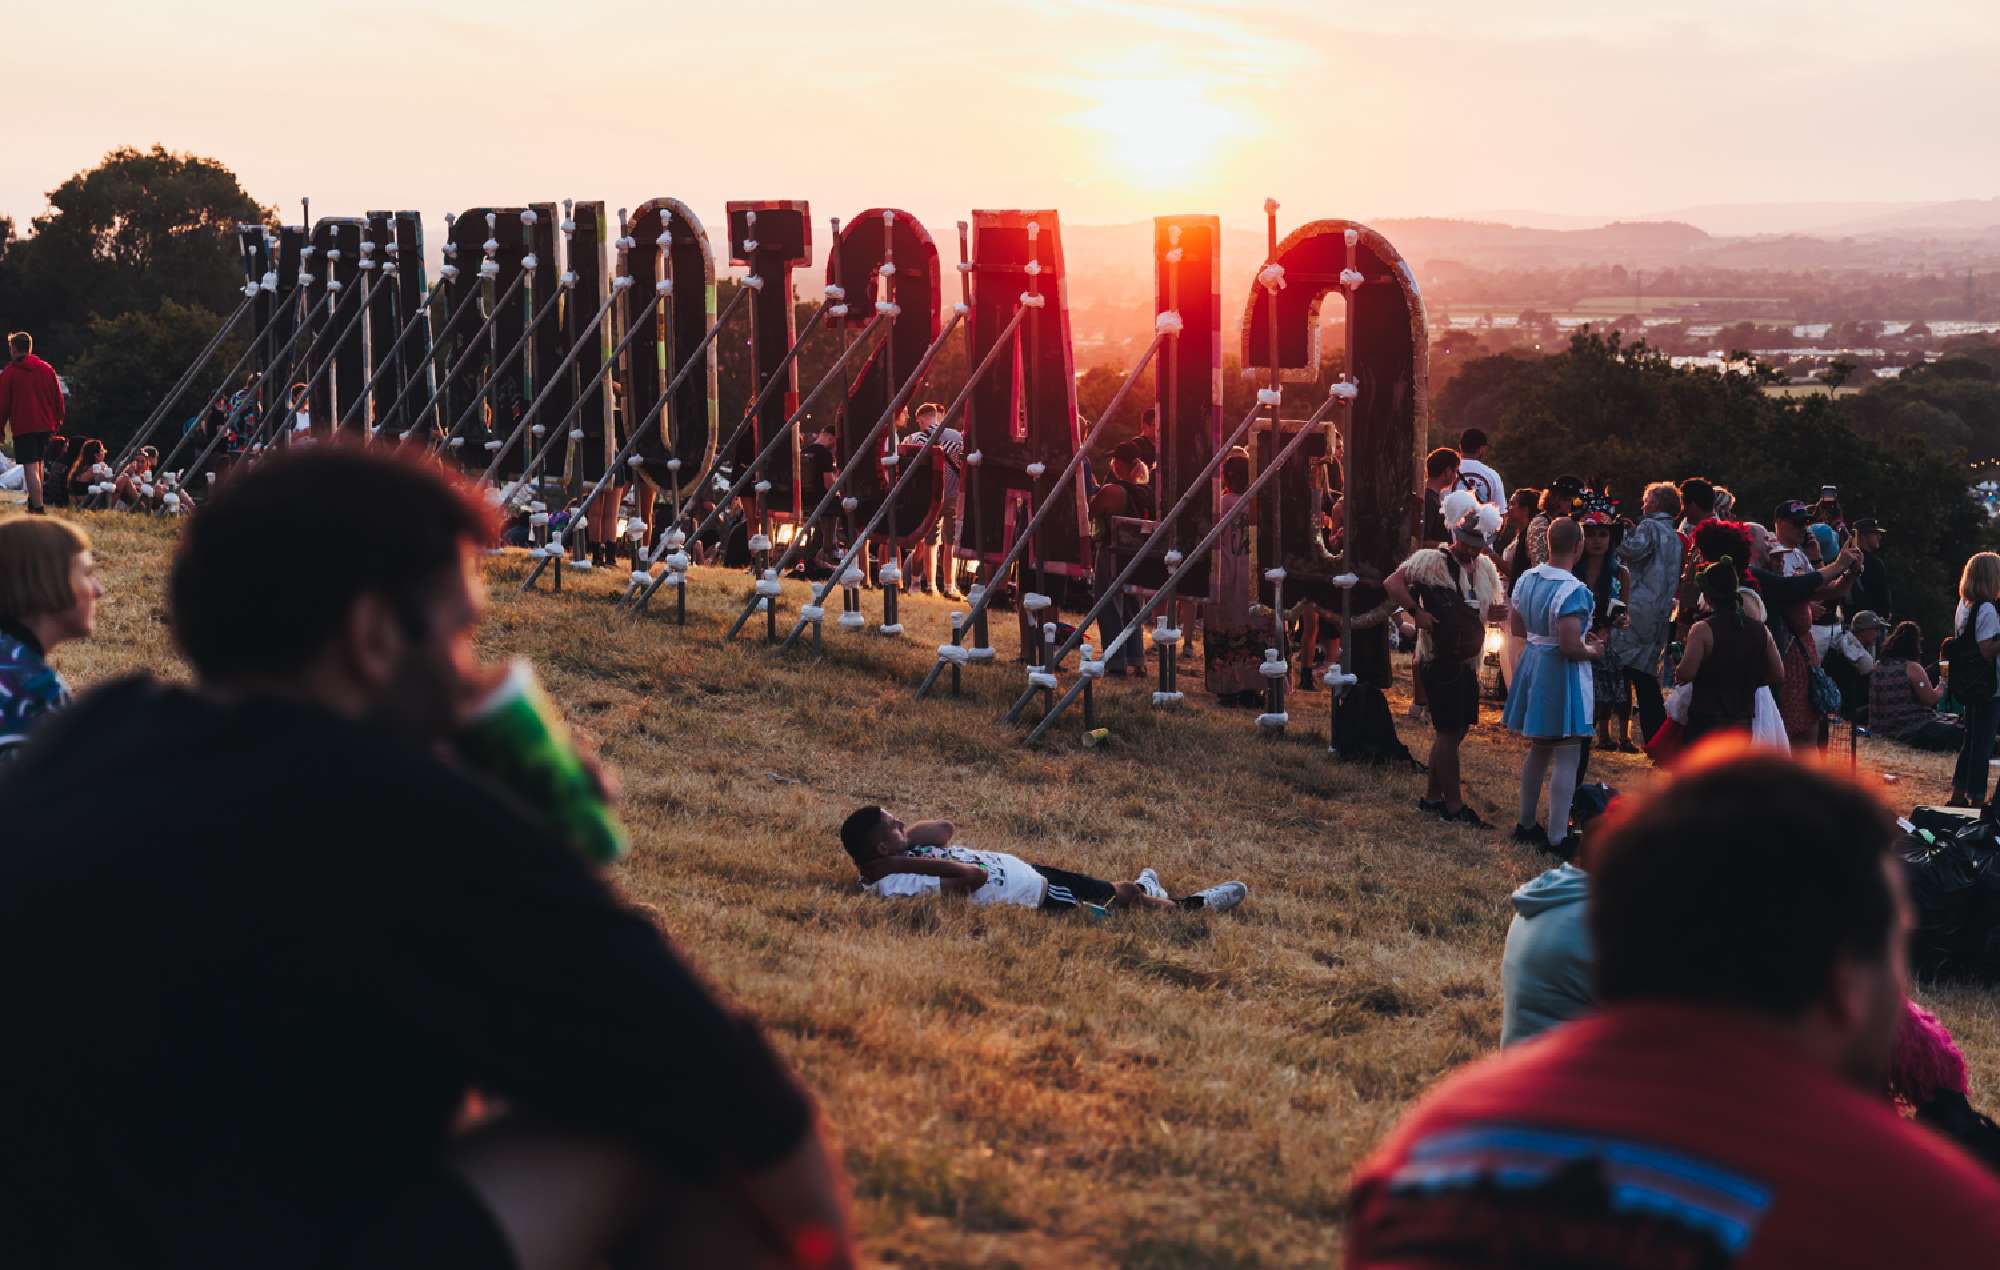 Caity Baser, Lulu, Frank Turner and Skindred among new names for Glastonbury 2024 line-up in Field Of Avalon reveal